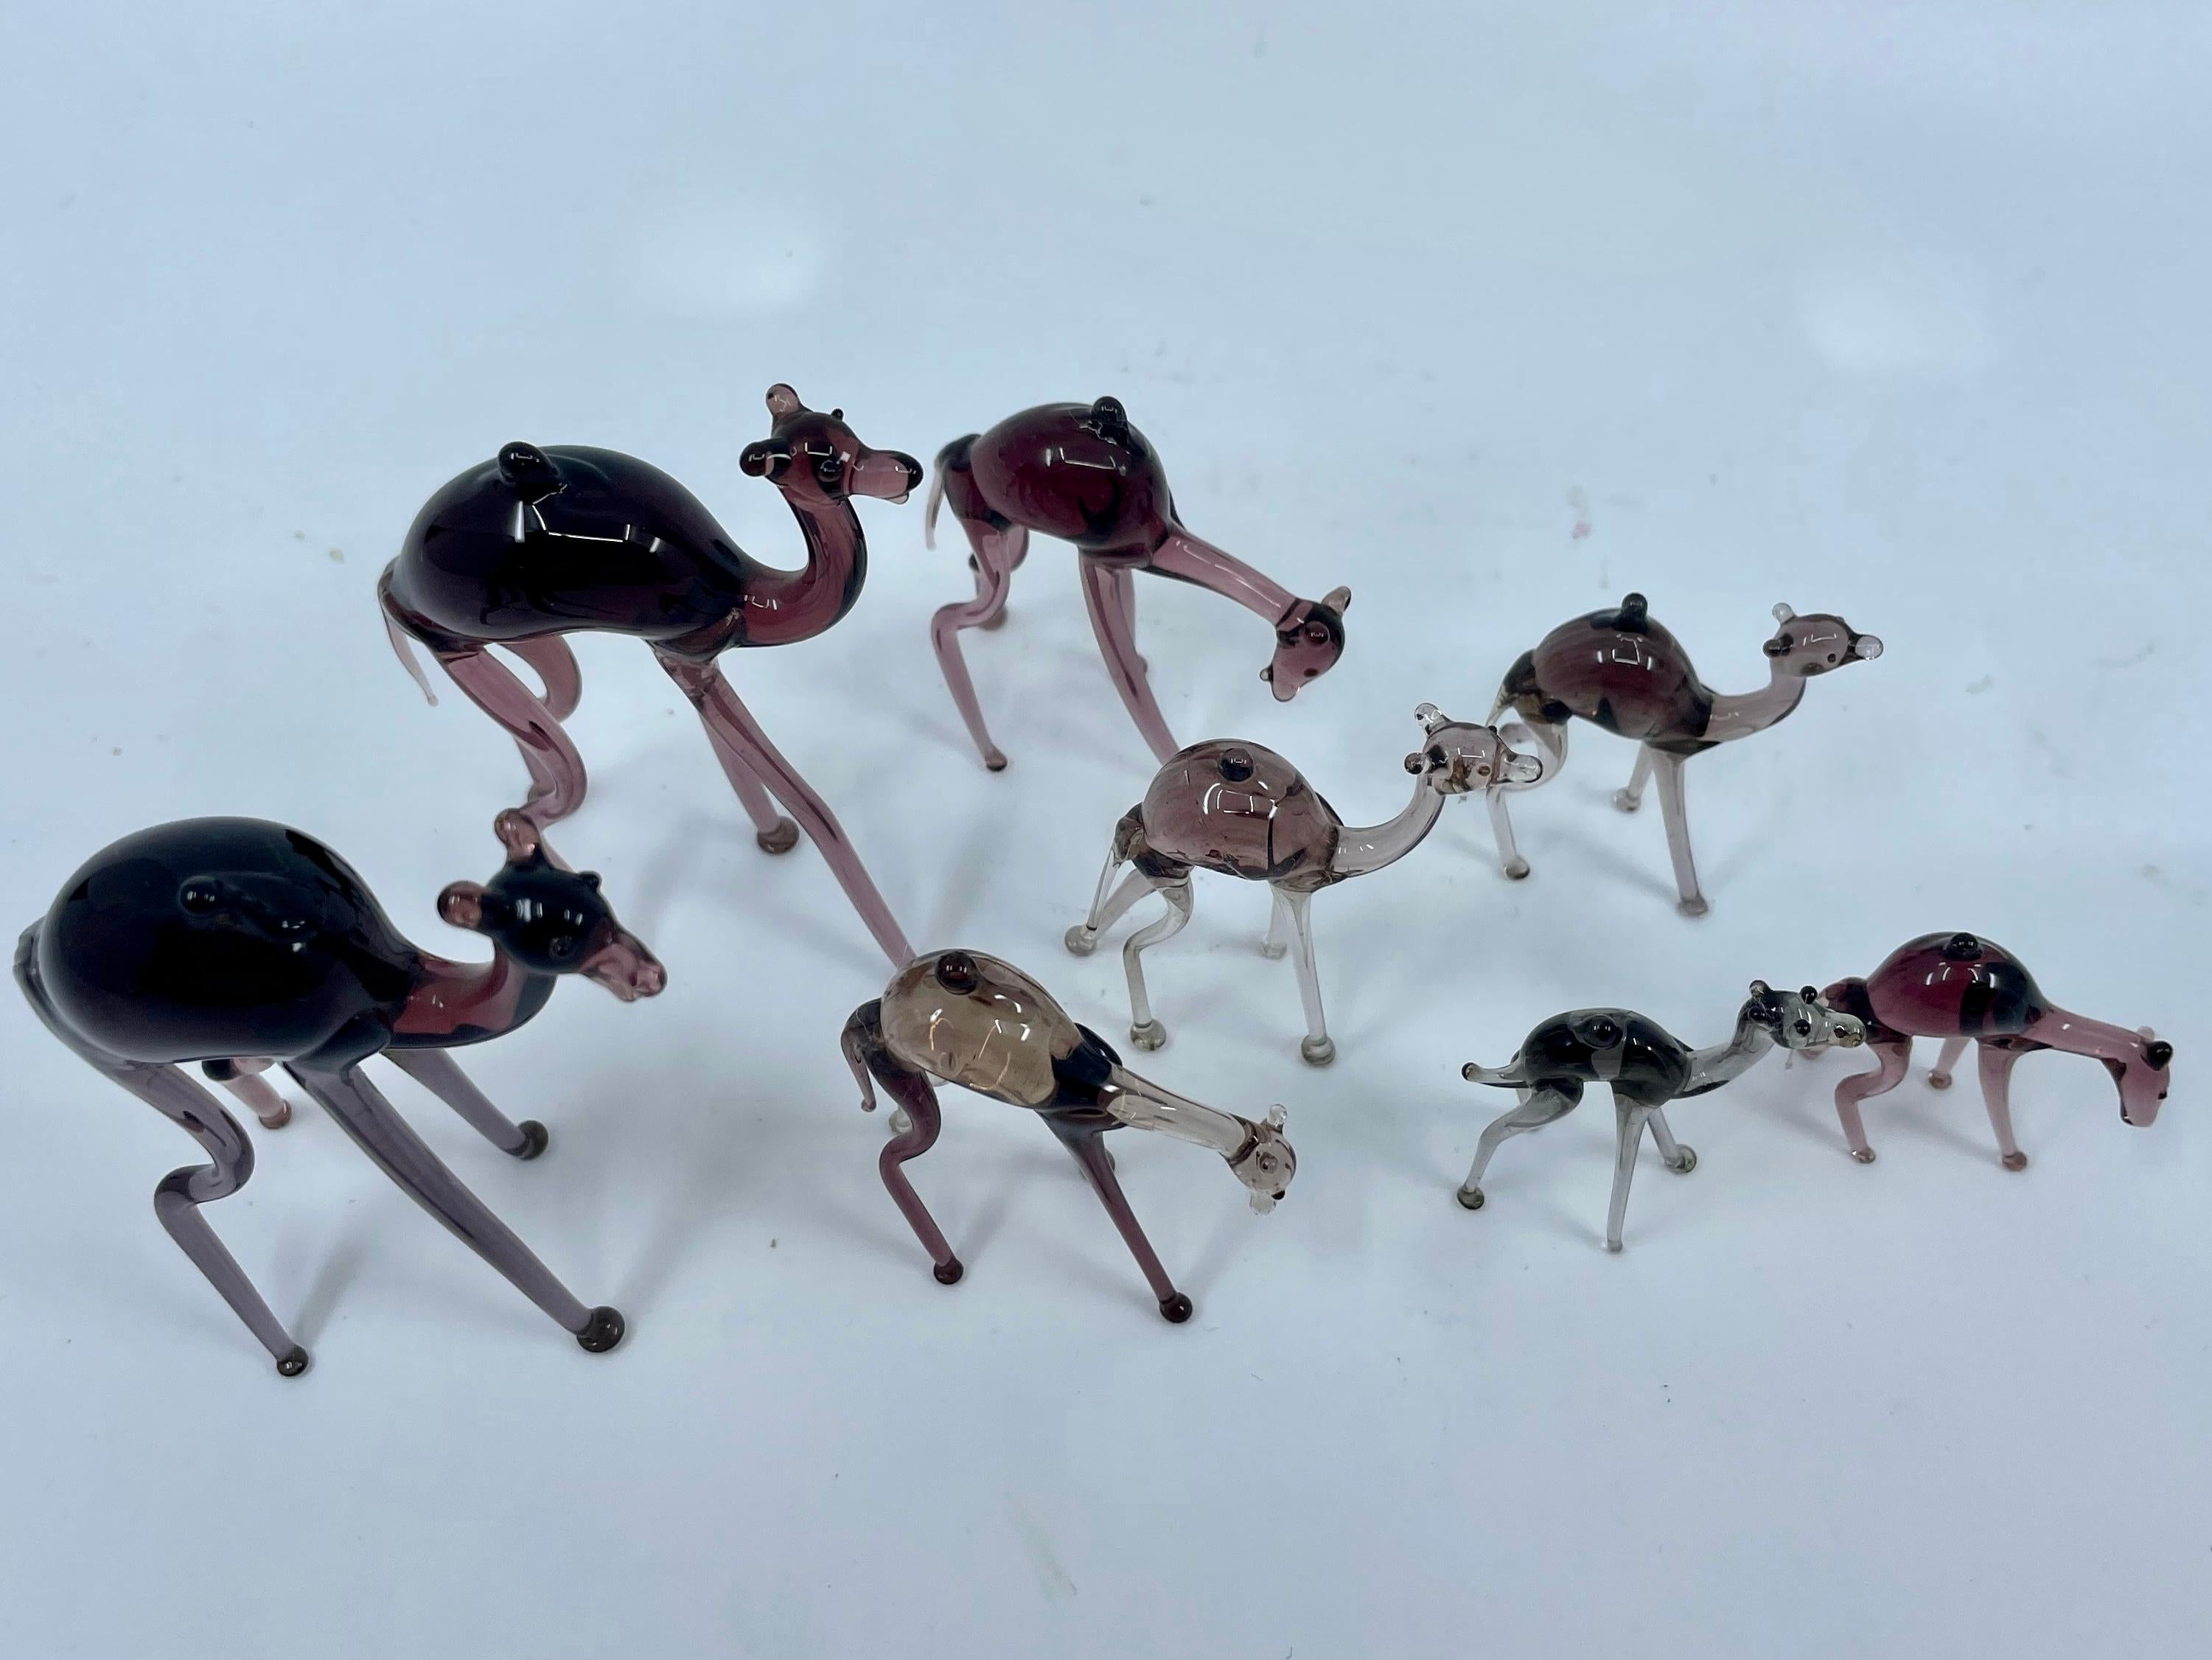 A caravan of eight amethyst camels.  An elegant display of dromedary caravan of amethyst camels from Venice ranging in size and color from amethyst to smokey grey. Italy, 1940's
Dimensions:
Largest 2.25